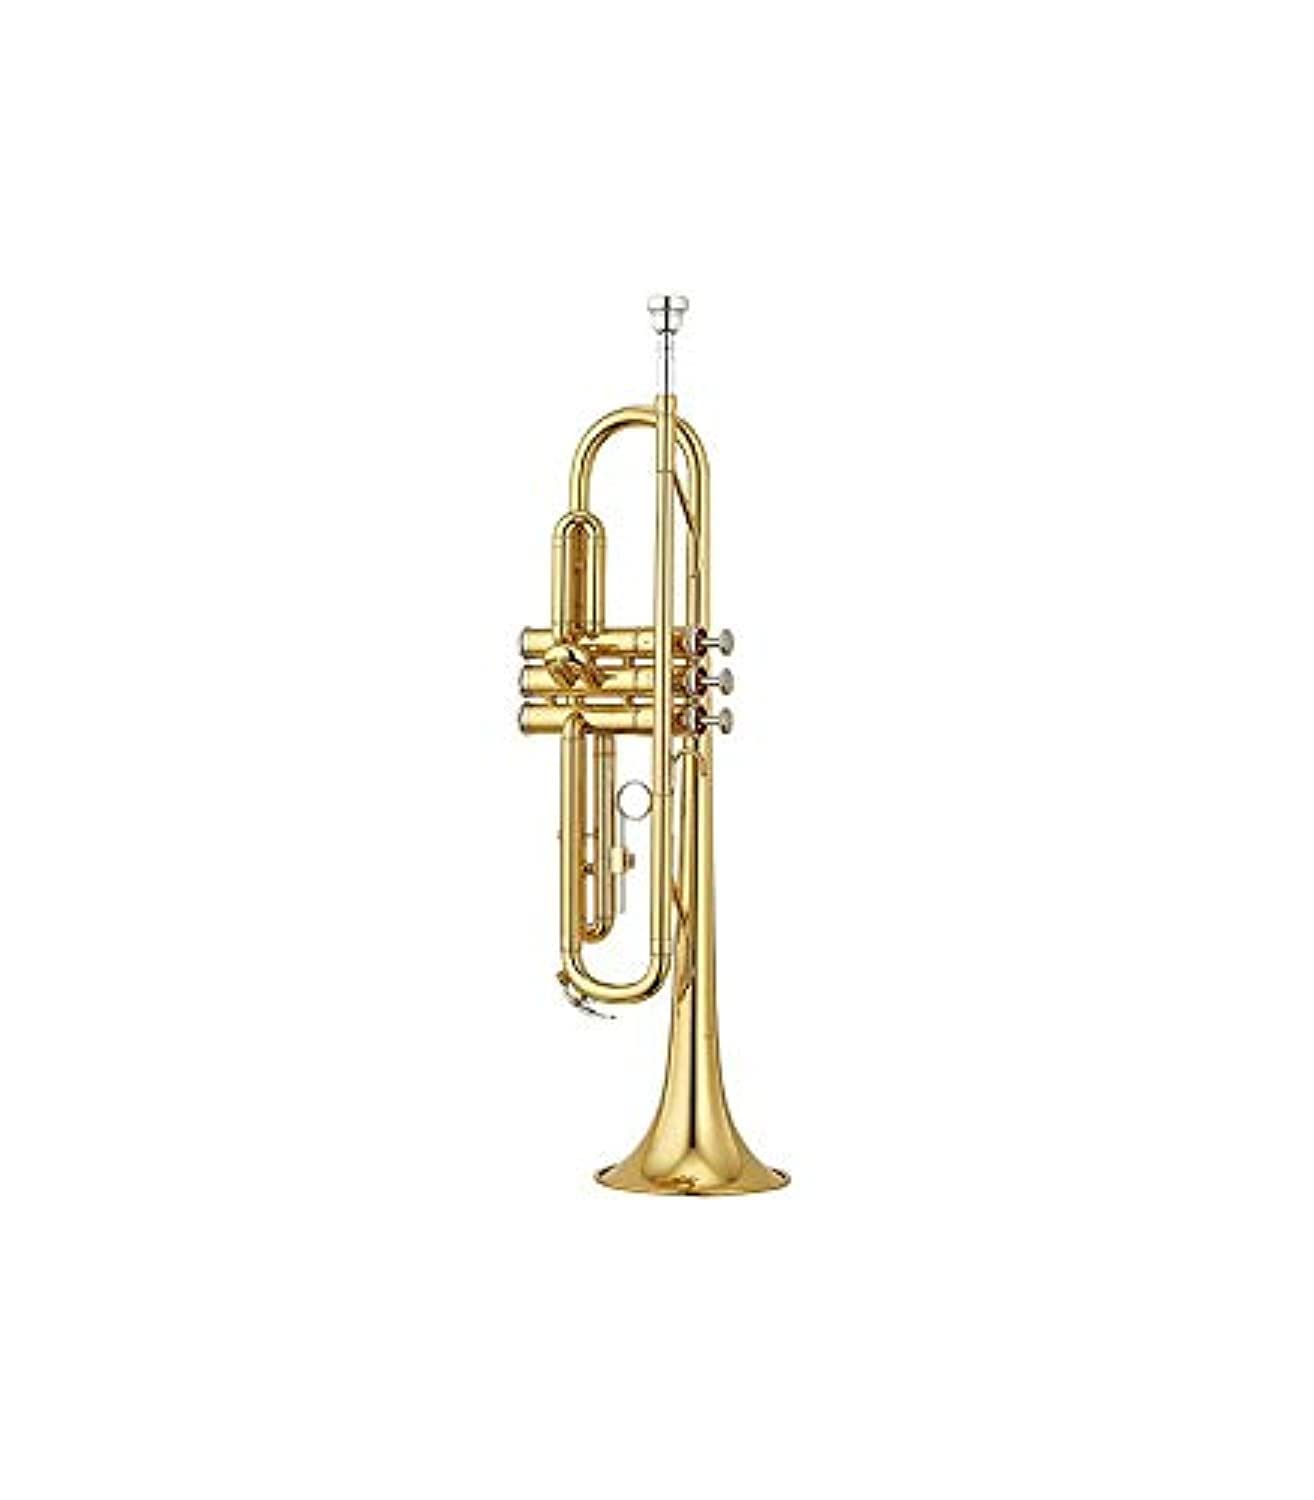 YAMAHA YTR-2330 Student Bb Trumpet - Gold Lacquer